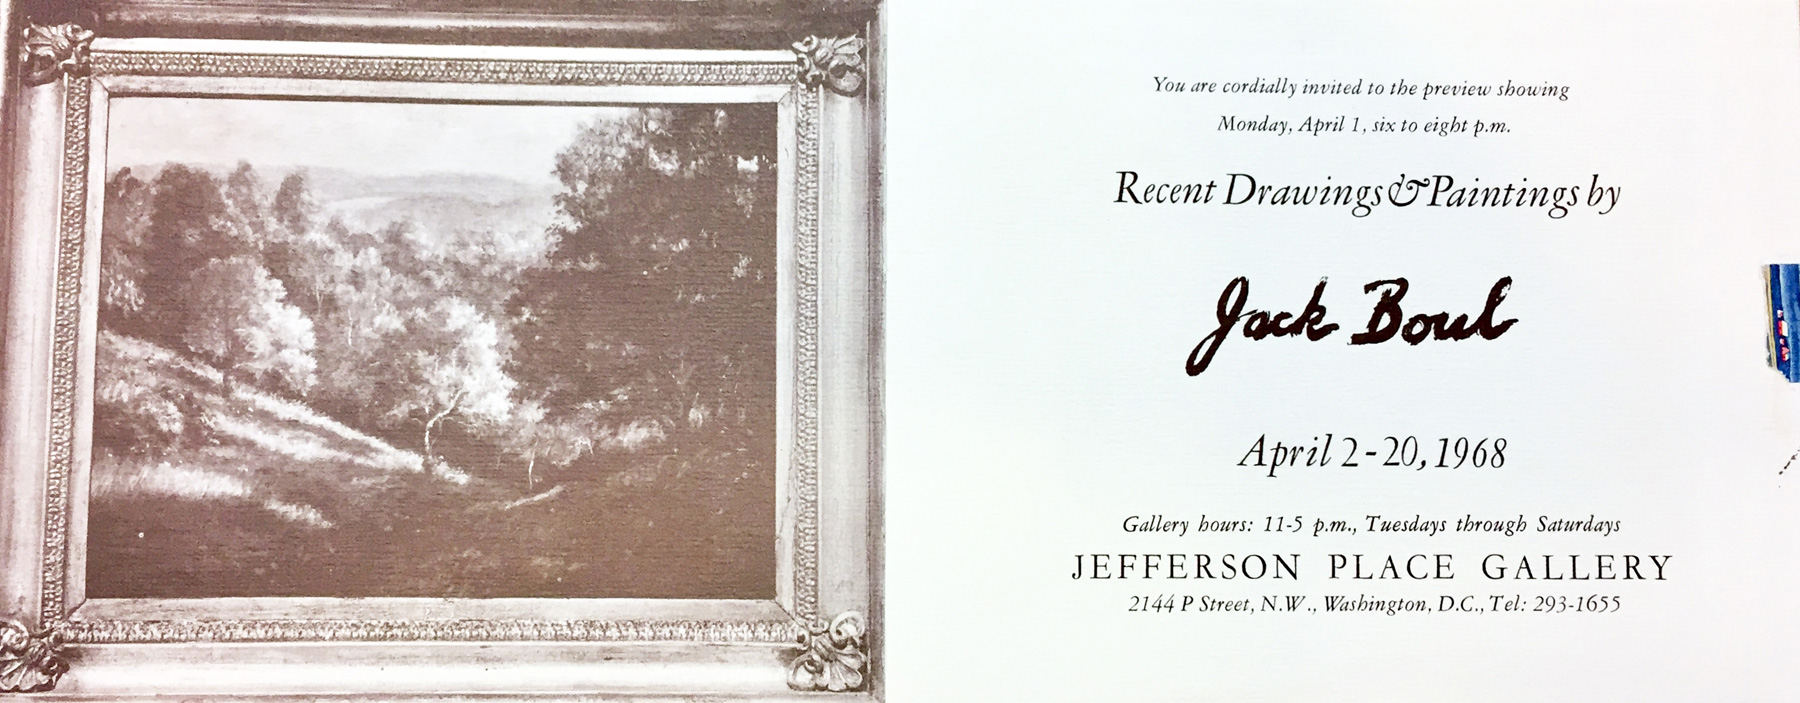 Announcement card for Jack Boul at Jefferson Place Gallery, 1968